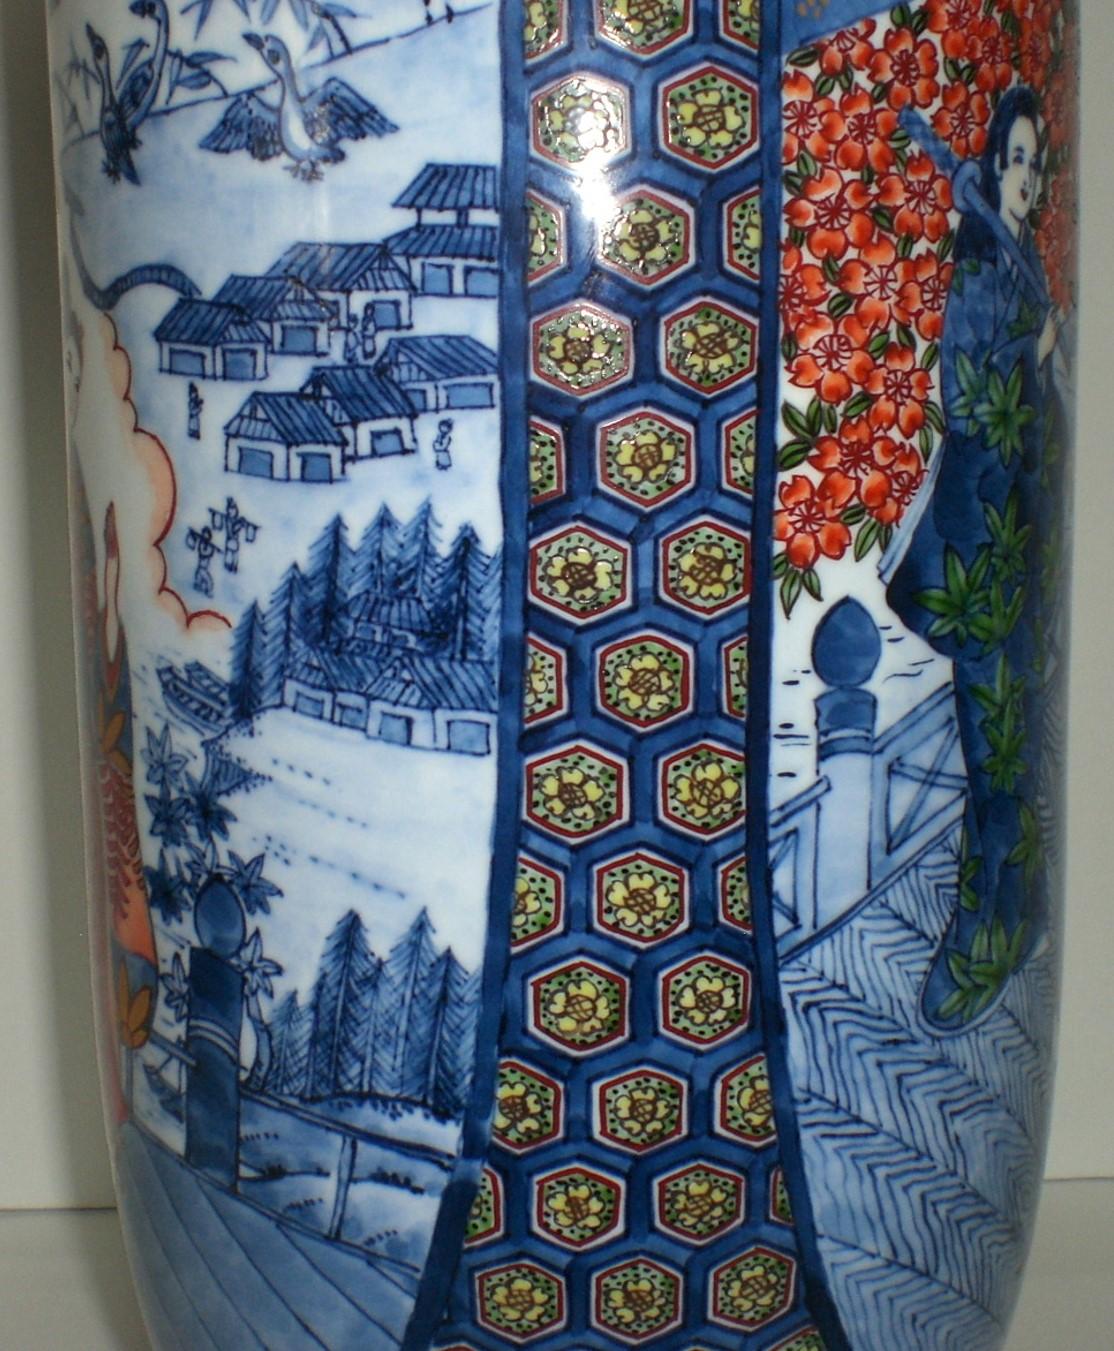 Extraordinary very large Japanese contemporary decorative porcelain vase, intricately hand painted on a tall, stunningly shaped porcelain body in red, green and blue, a signed masterpiece by highly acclaimed award-winning master porcelain artist of